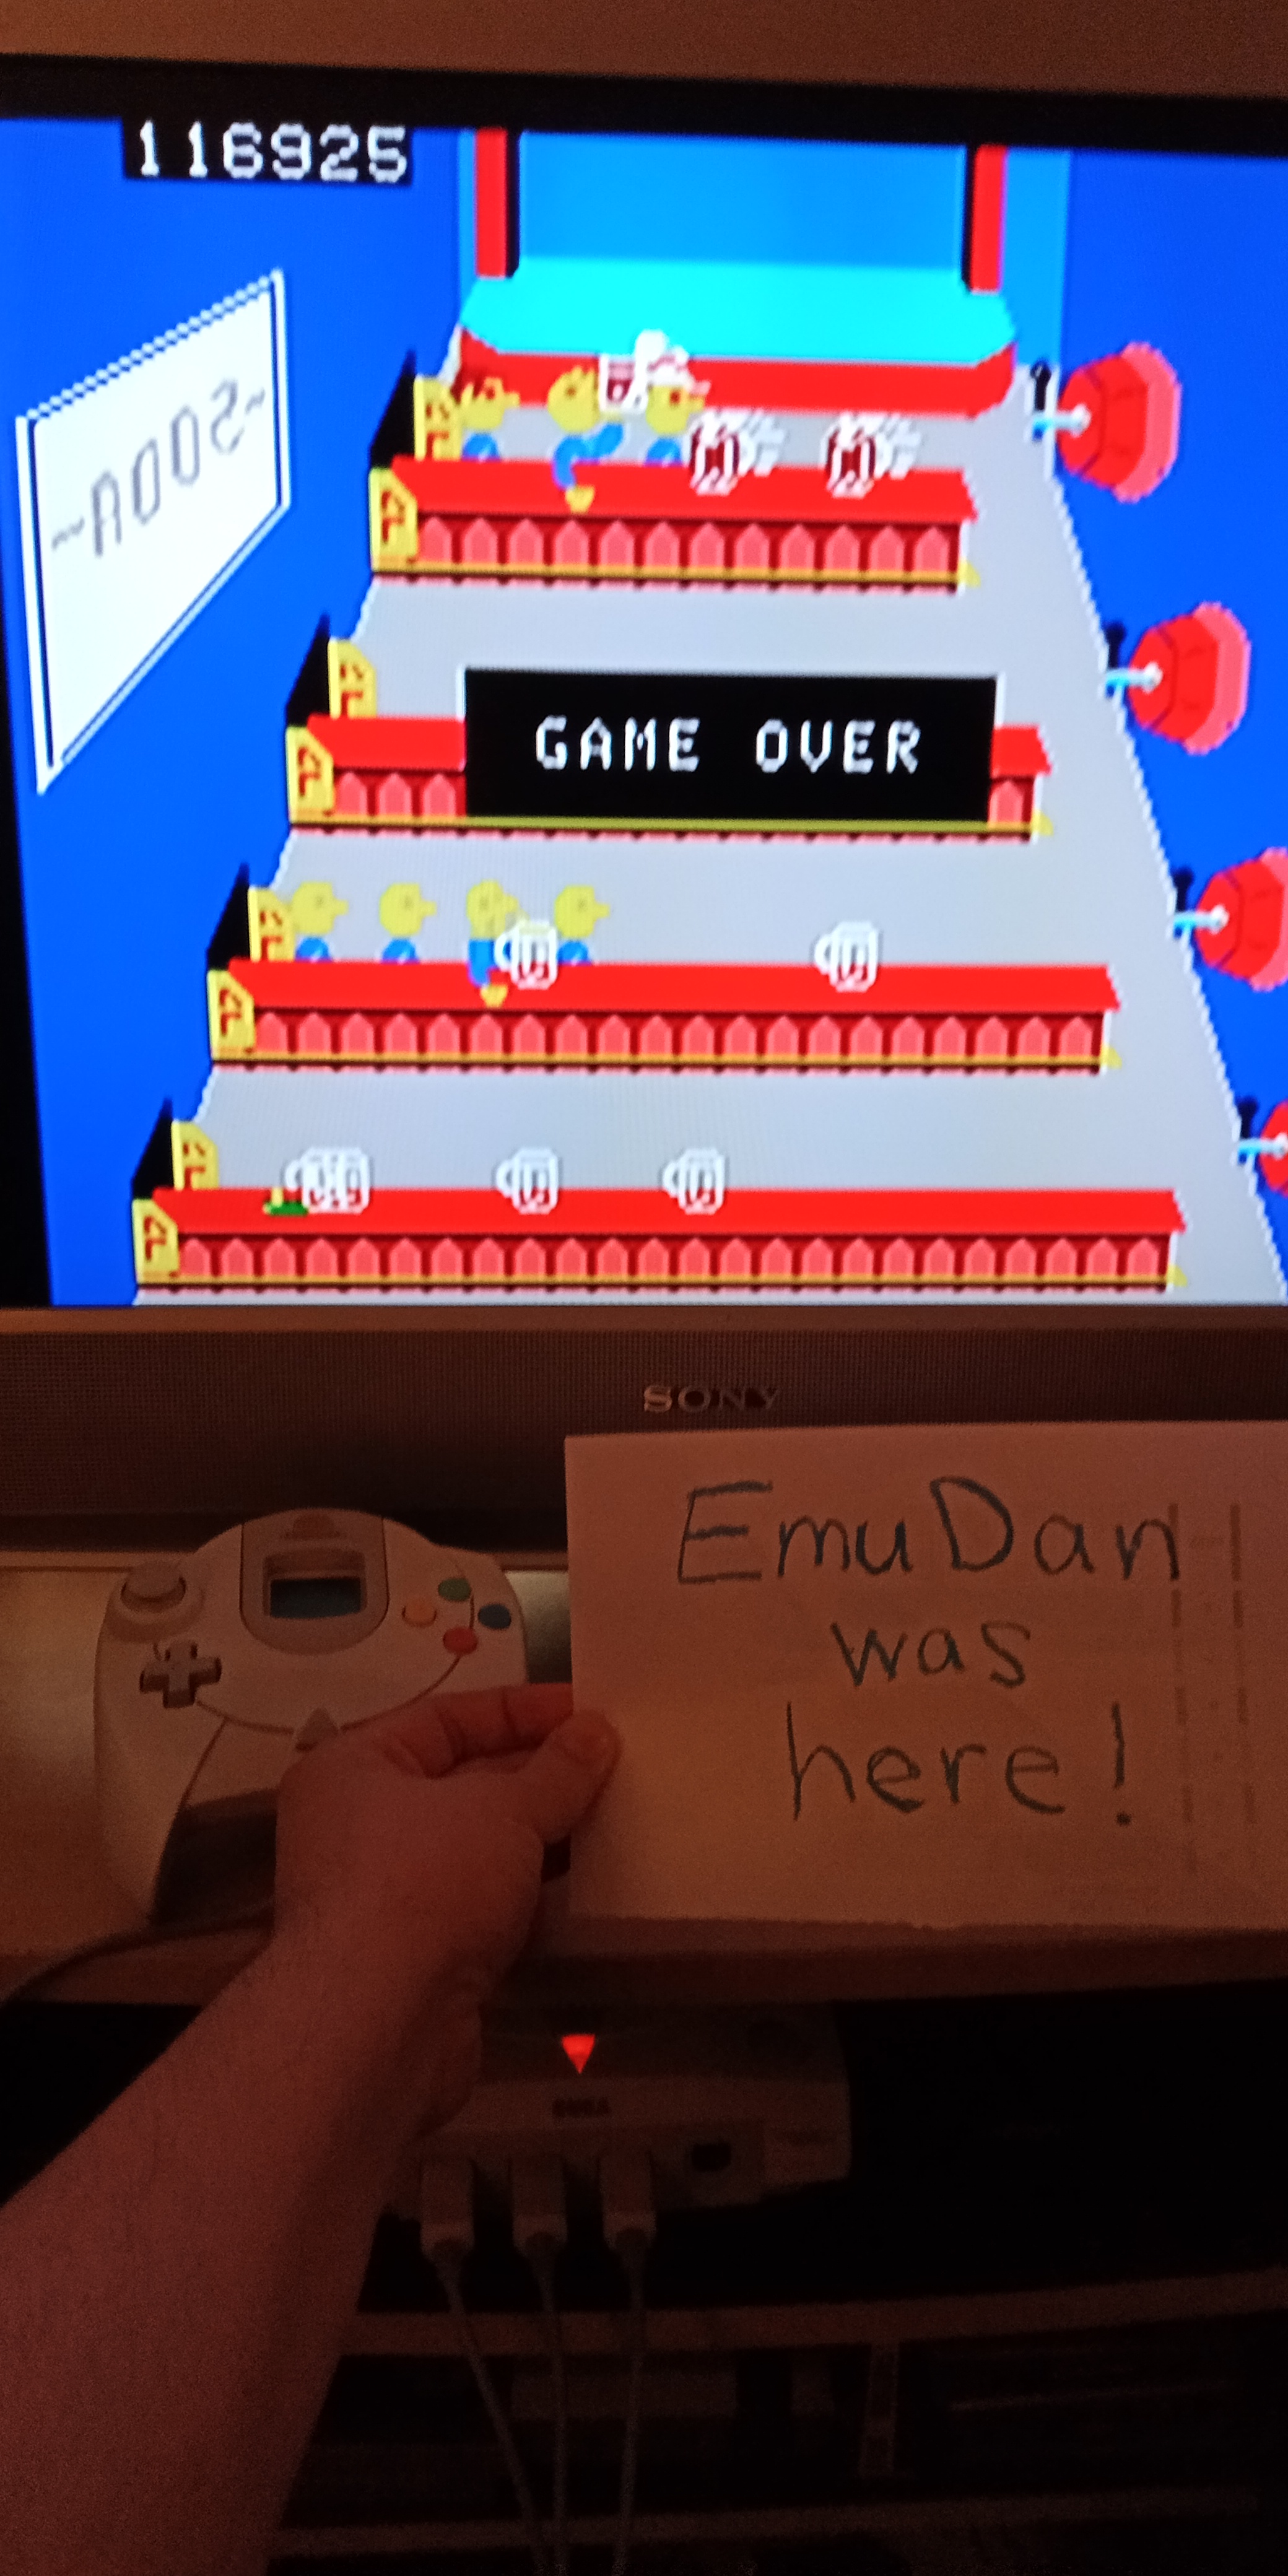 EmuDan: Tapper (Colecovision Emulated) 116,925 points on 2019-05-08 17:25:14